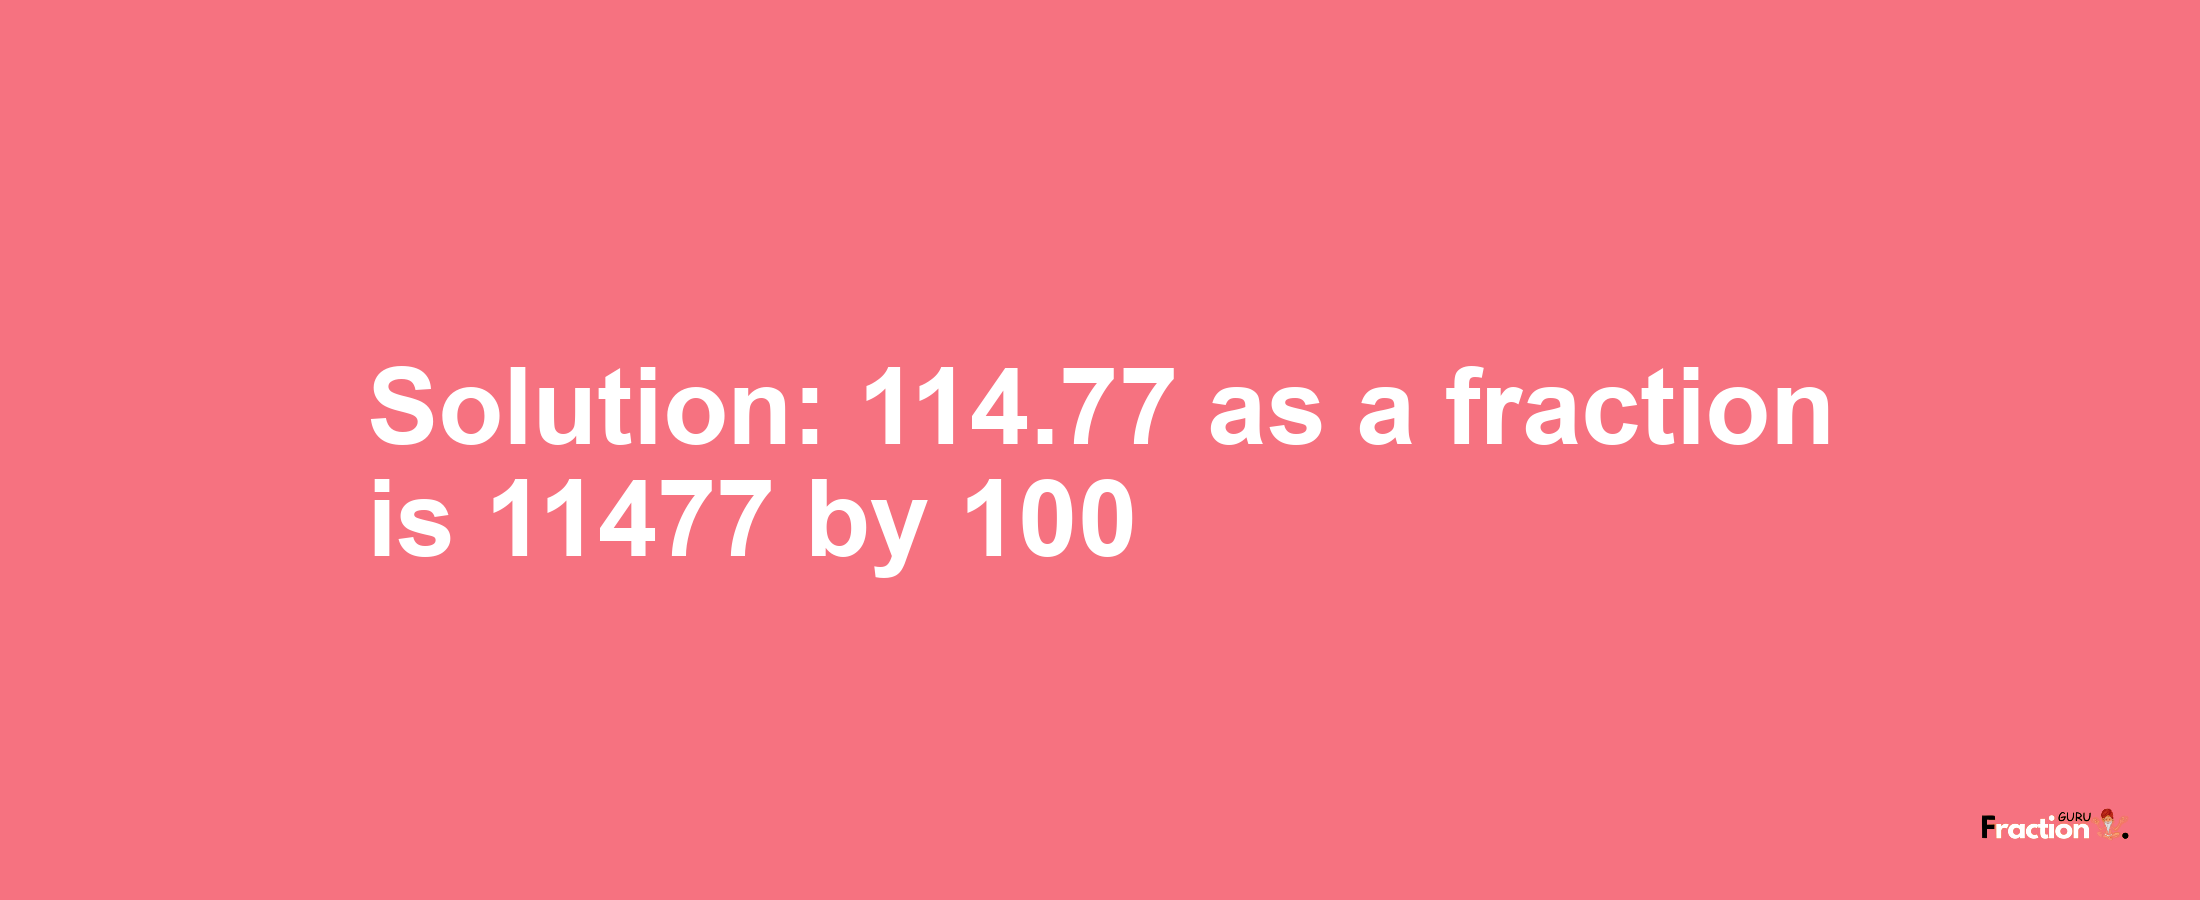 Solution:114.77 as a fraction is 11477/100